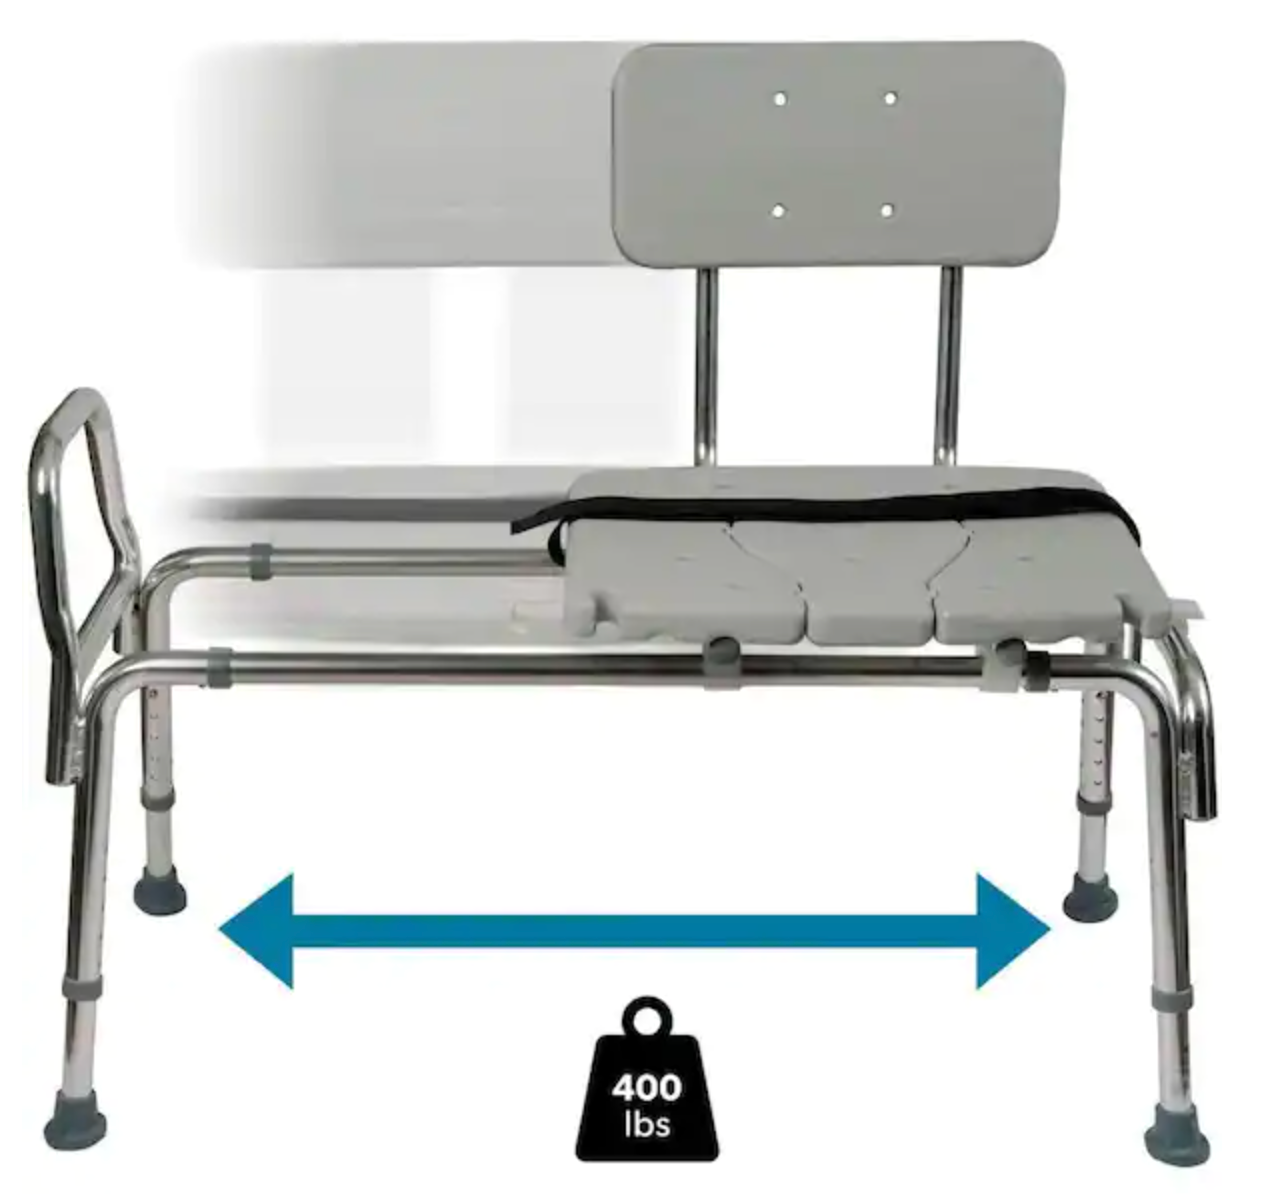 Sliding Transfer Bench with Cut-Out Seat